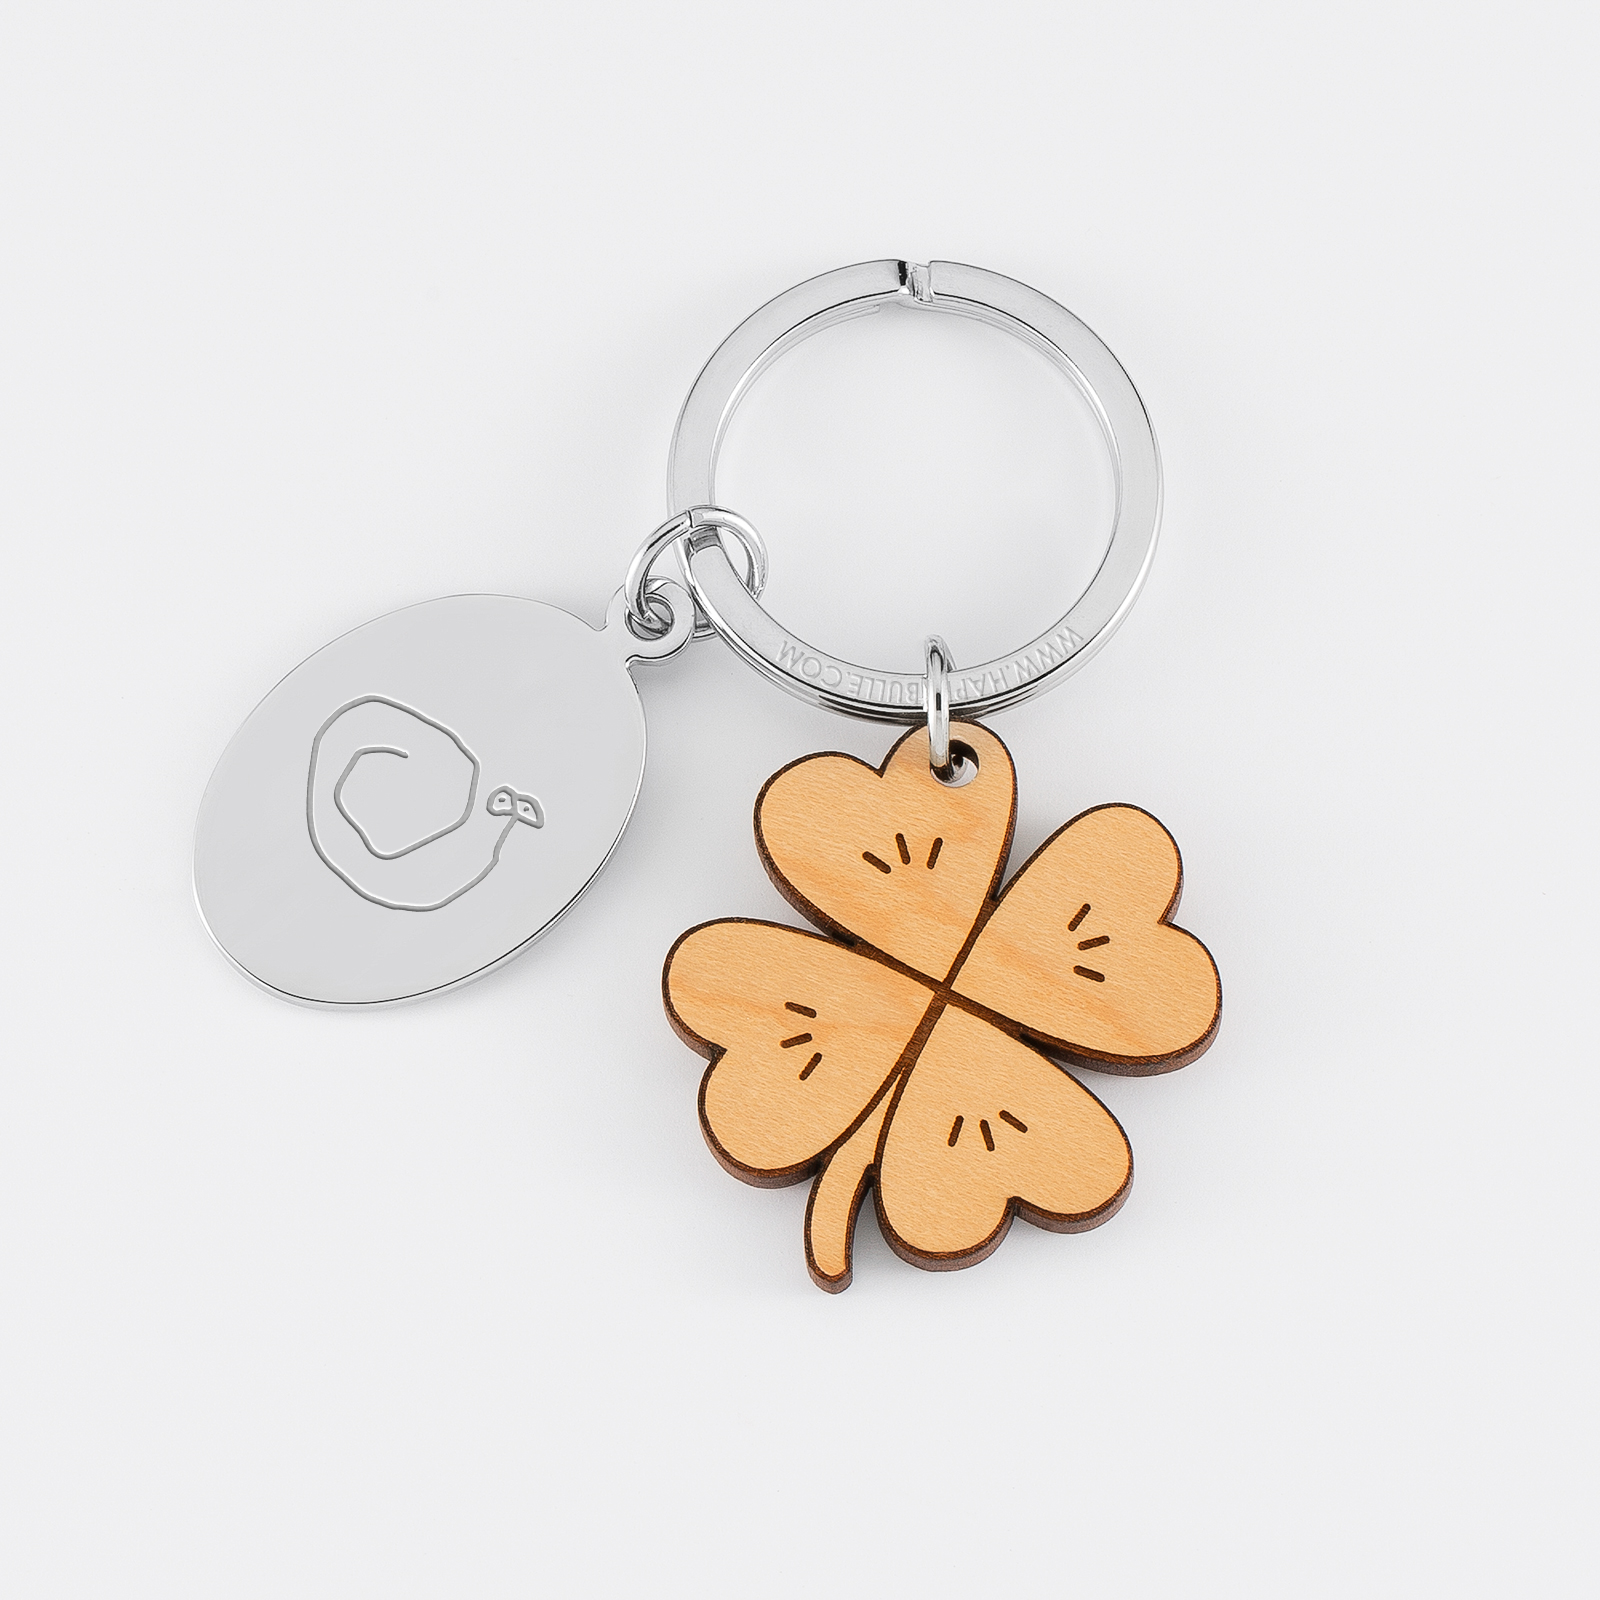 Personalised engraved oval steel medallion and wooden clover charm keyring - sketch